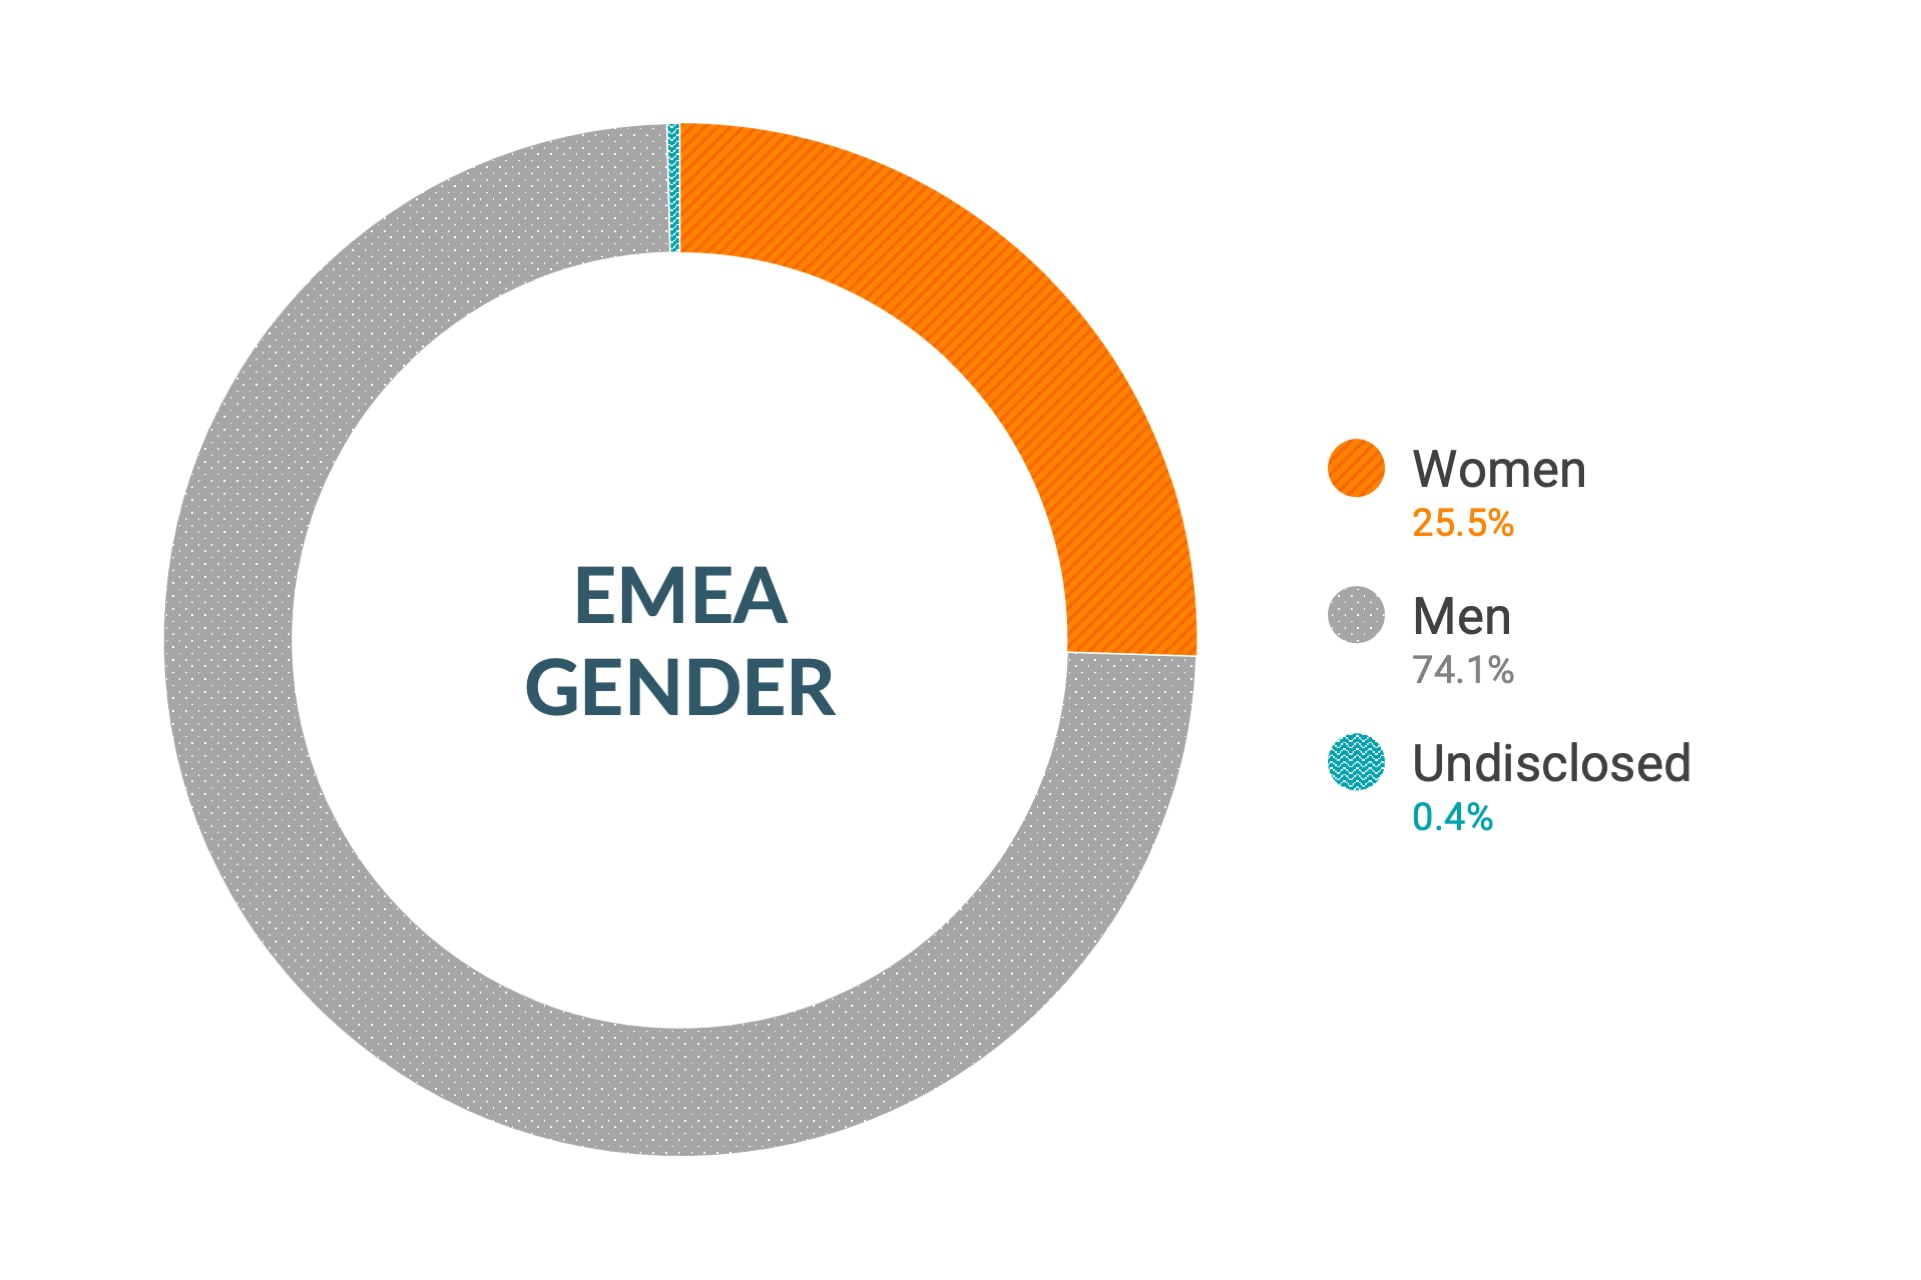 Cloudera Diversity and Inclusion data for EMEA Gender: Women 25.2%, Men 74.3%, Undisclosed 0.5%%